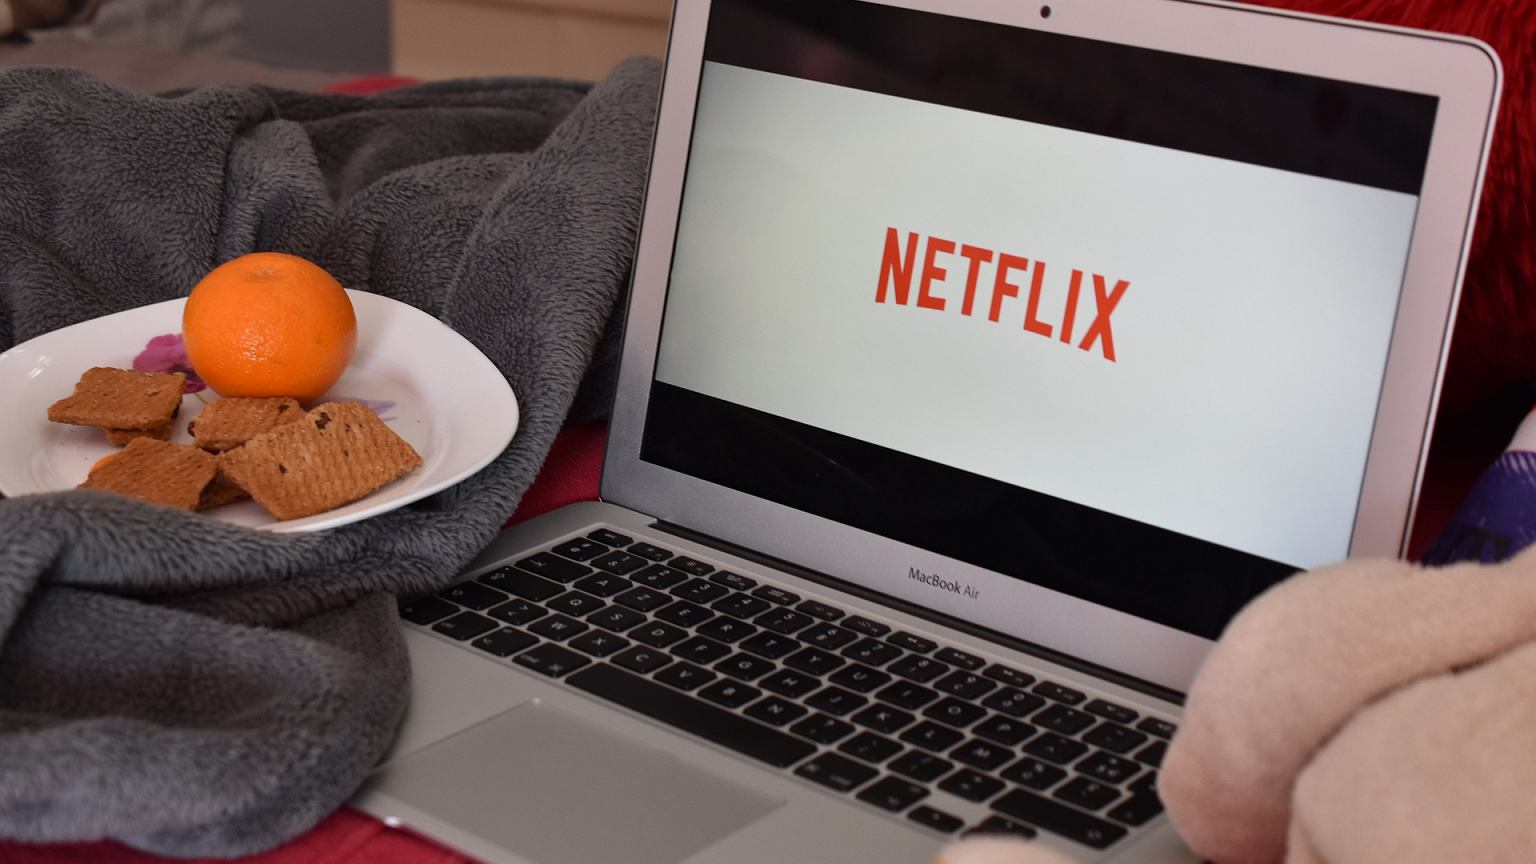 Netflix hits for free.